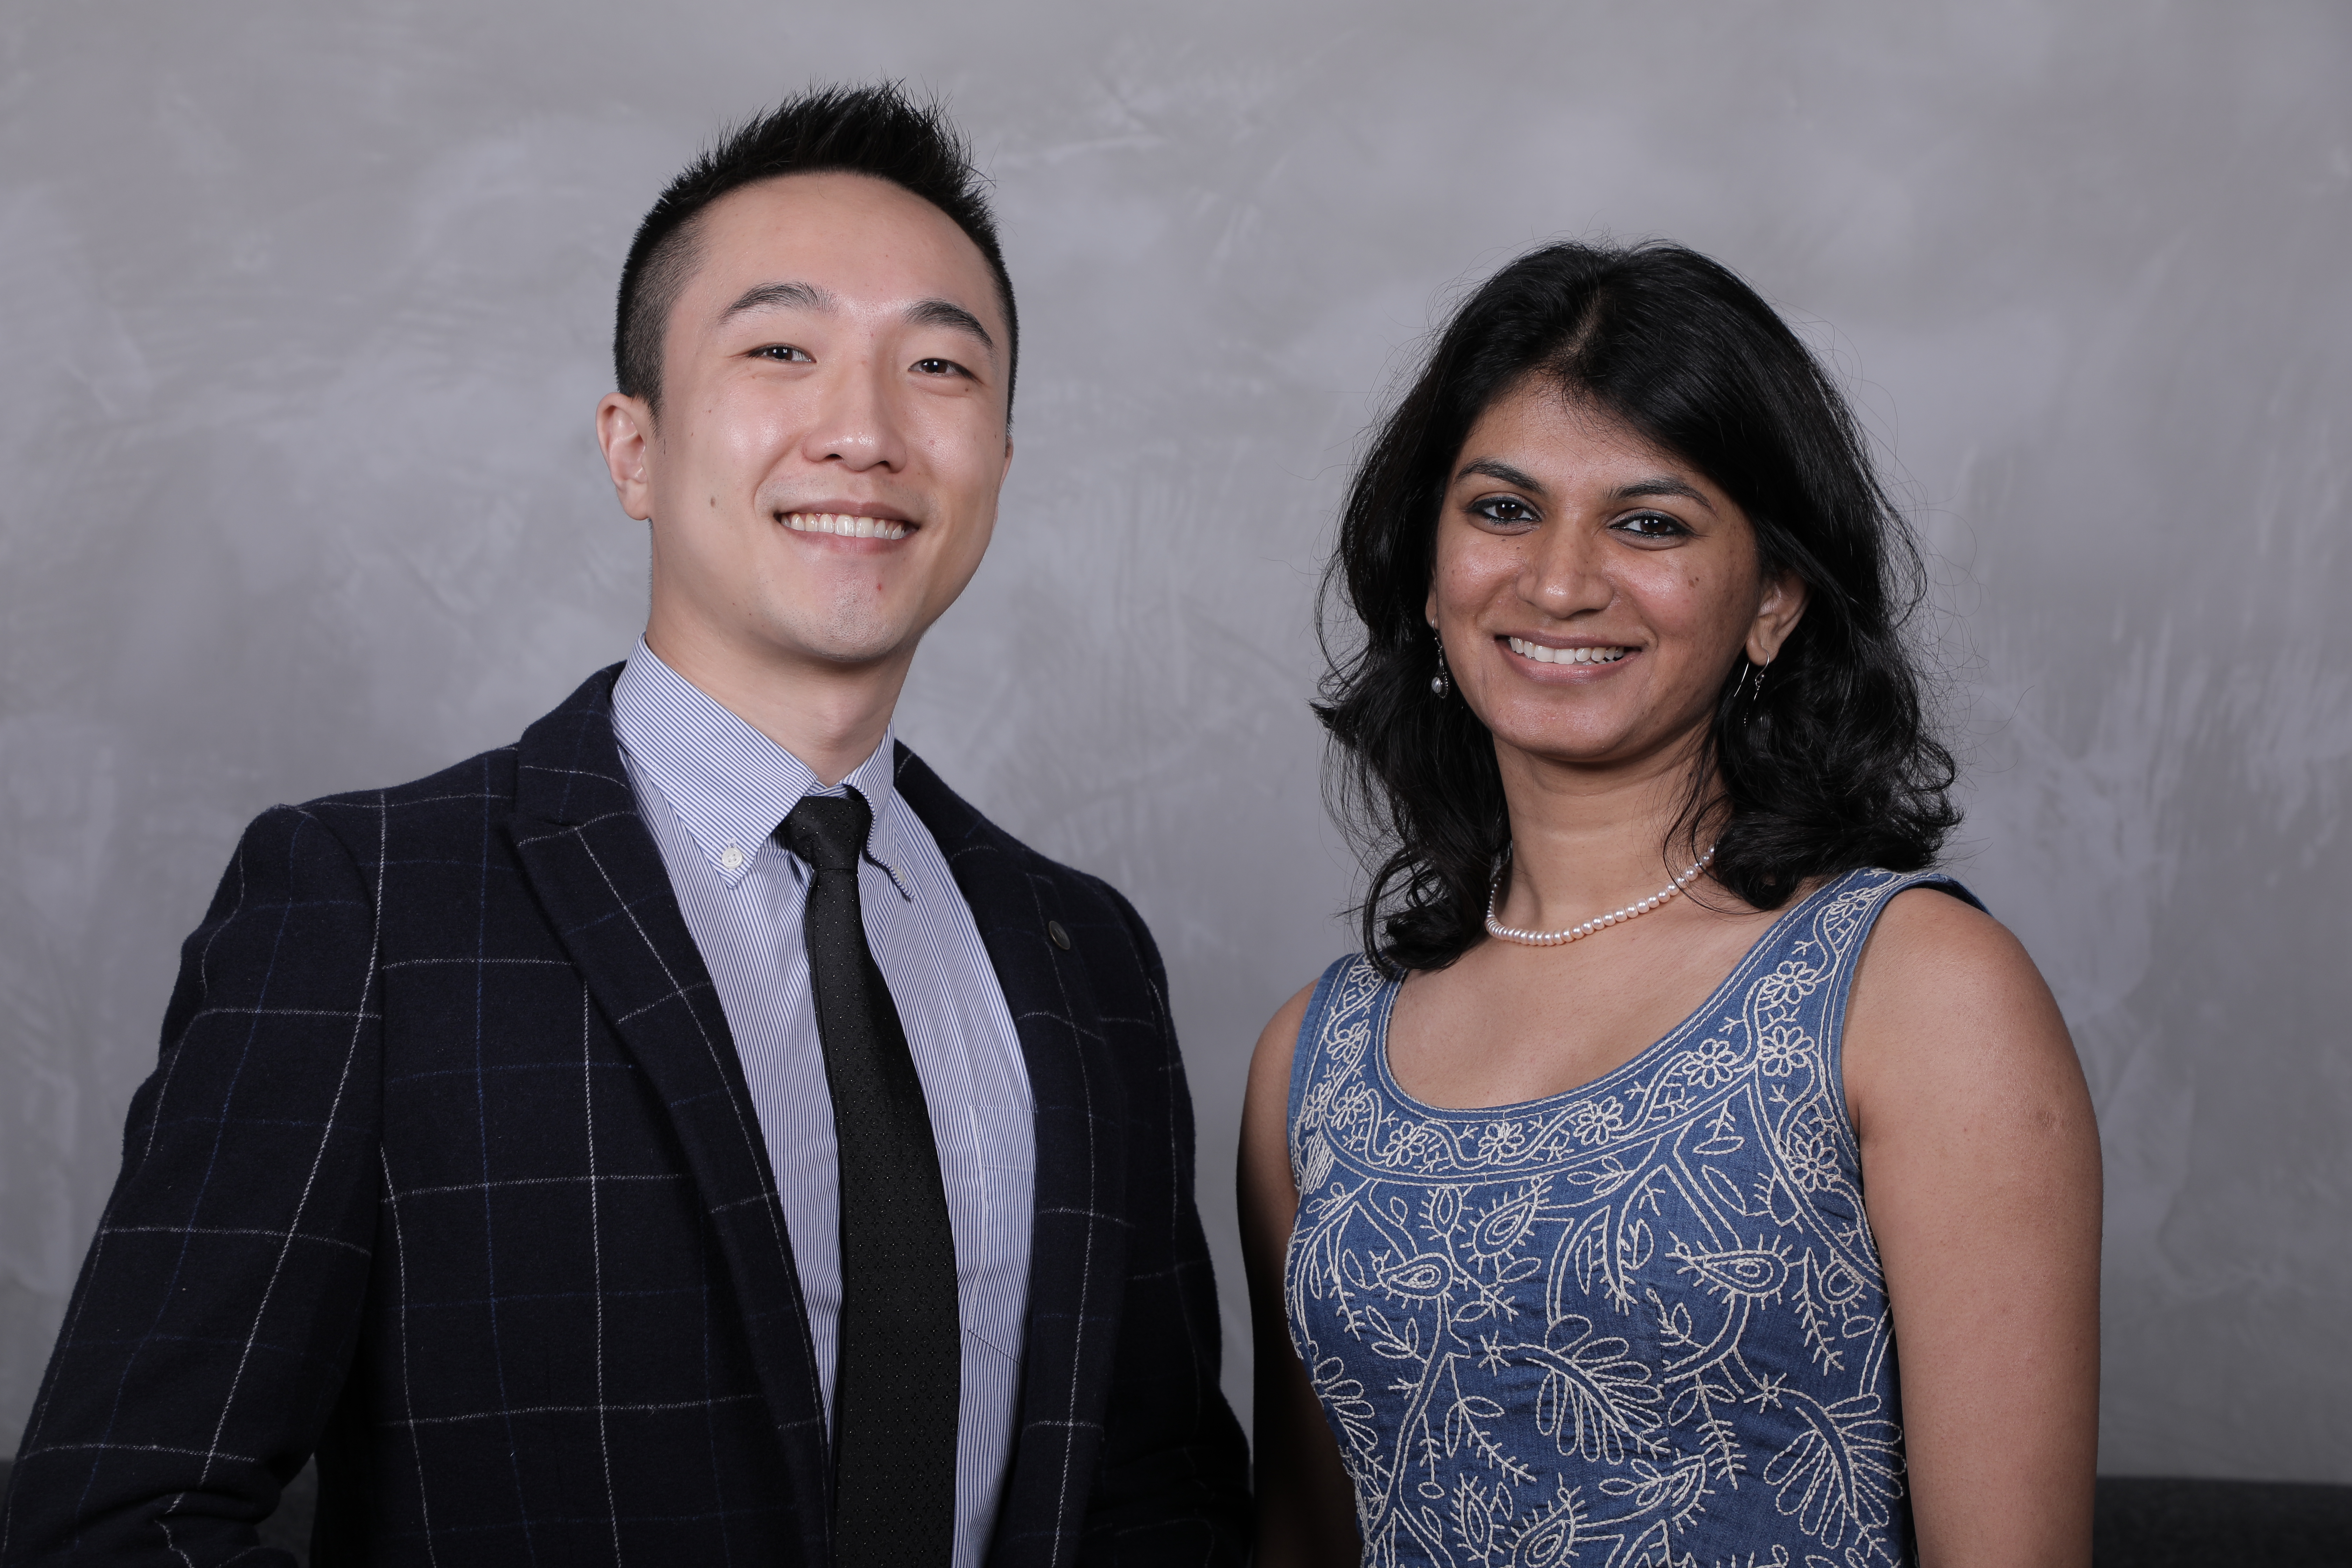 A photo of Portcast founders Dr. Lingxiao Xia and Nidhi Gupta